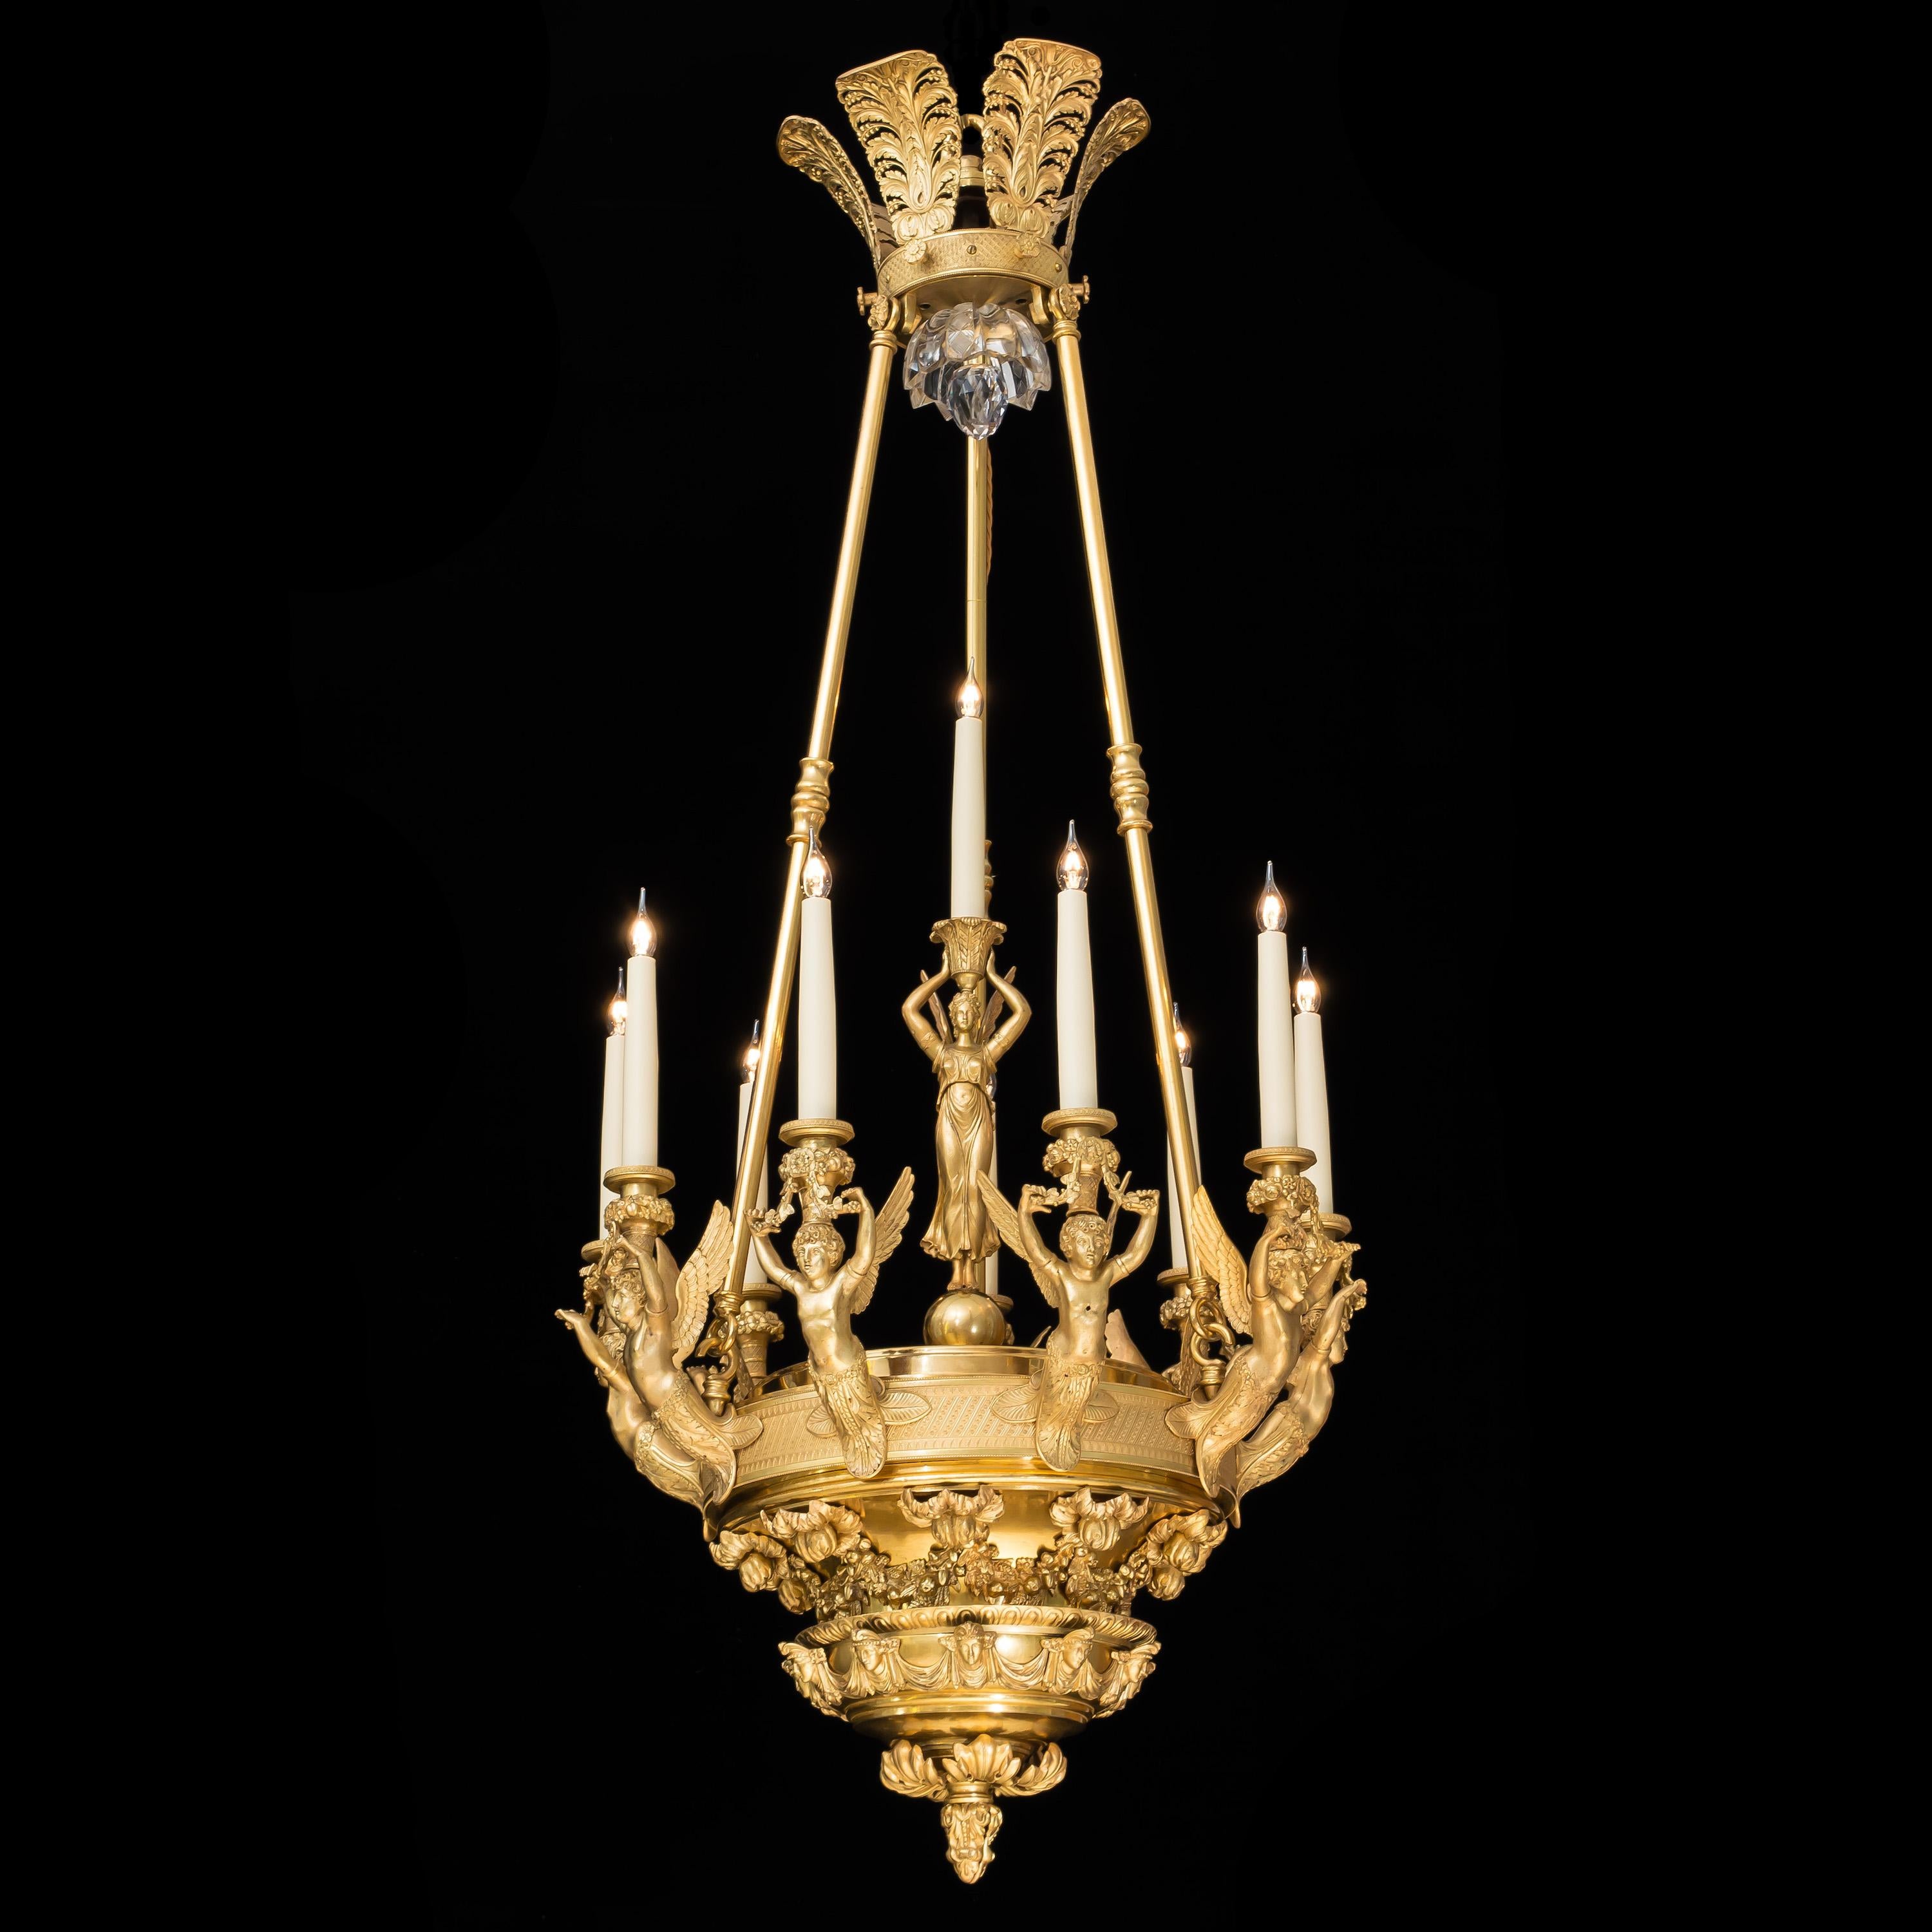 A French Empire Style Ormolu 10-Light Chandelier

Constructed from gilded bronze, with hand-chased details and burnished highlights, the chandelier composed of a central dish inspired by an Ancient Roman oil lamp adorned with floral garlands and